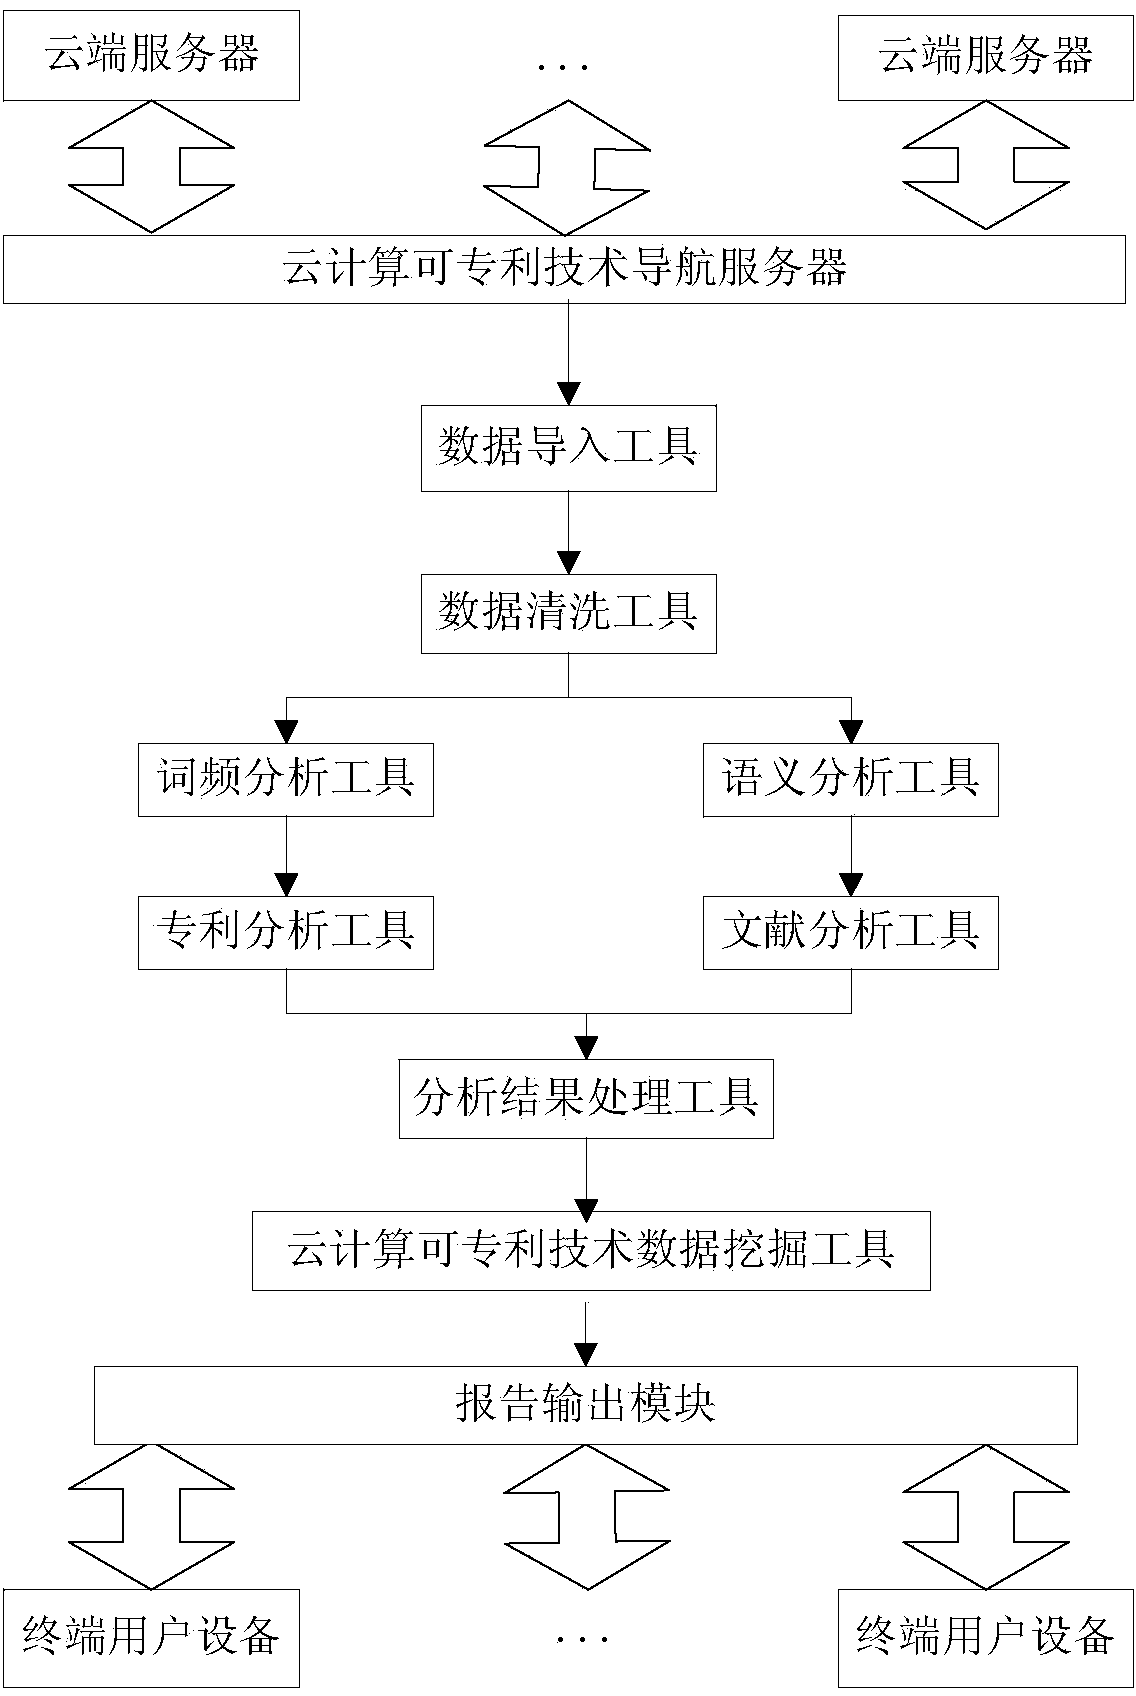 Cloud computing patentability technology navigation system and method